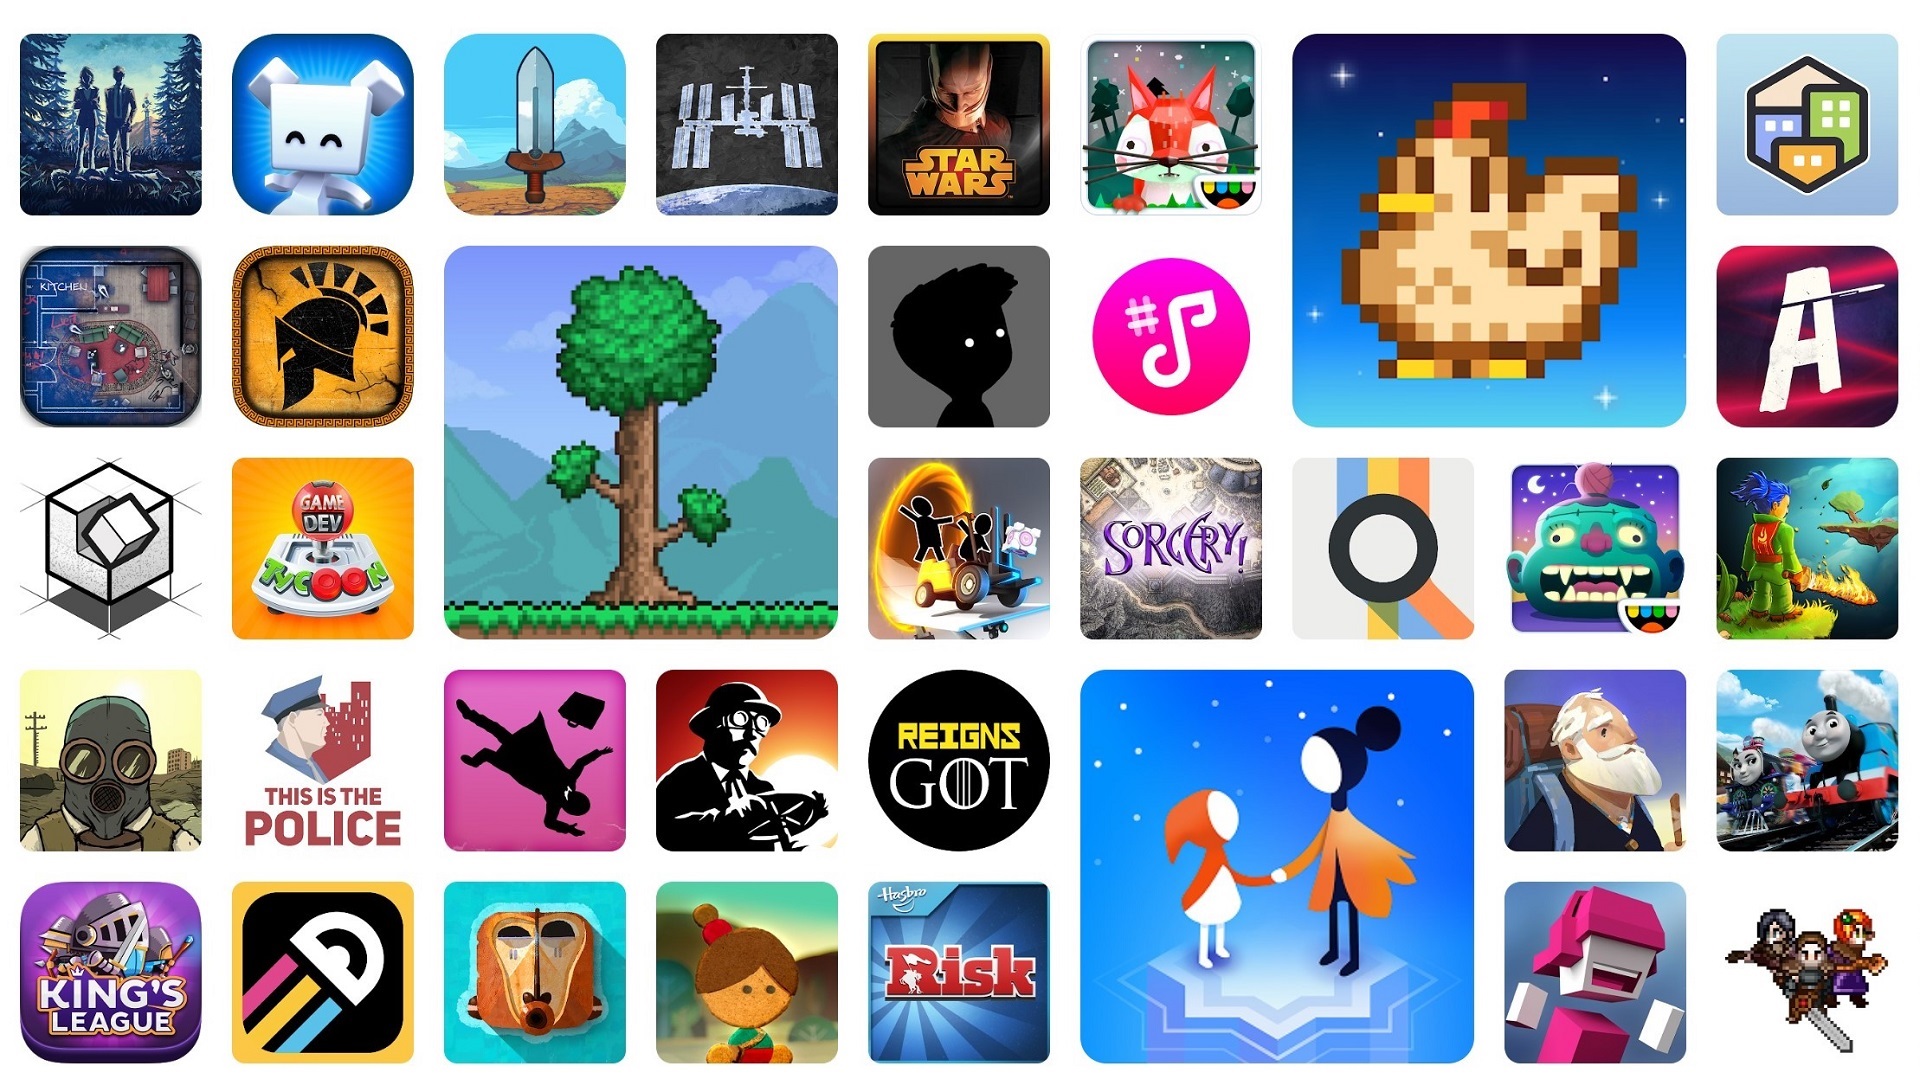  The full list of included game and app titles